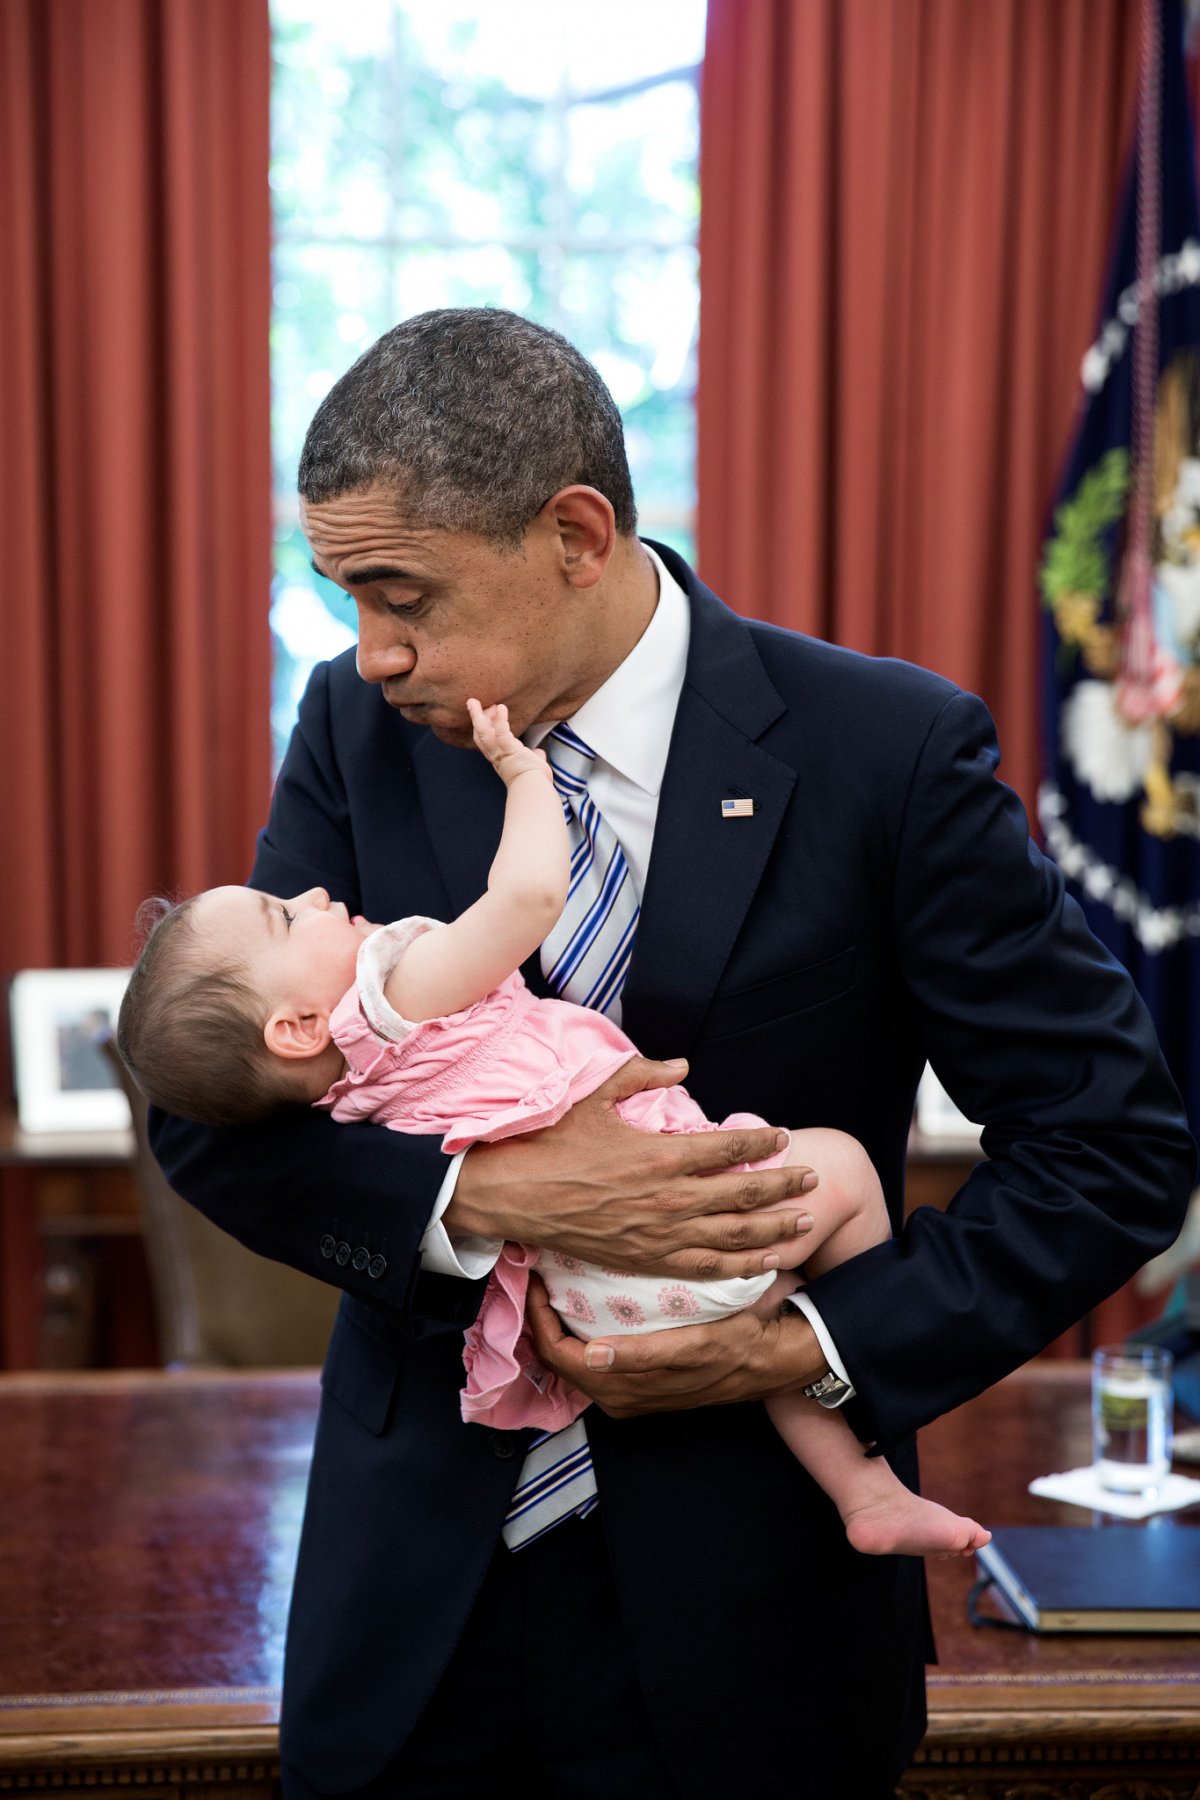 obama-puffs-out-his-cheeks-to-amuse-an-infant-visitor-to-the-oval-office